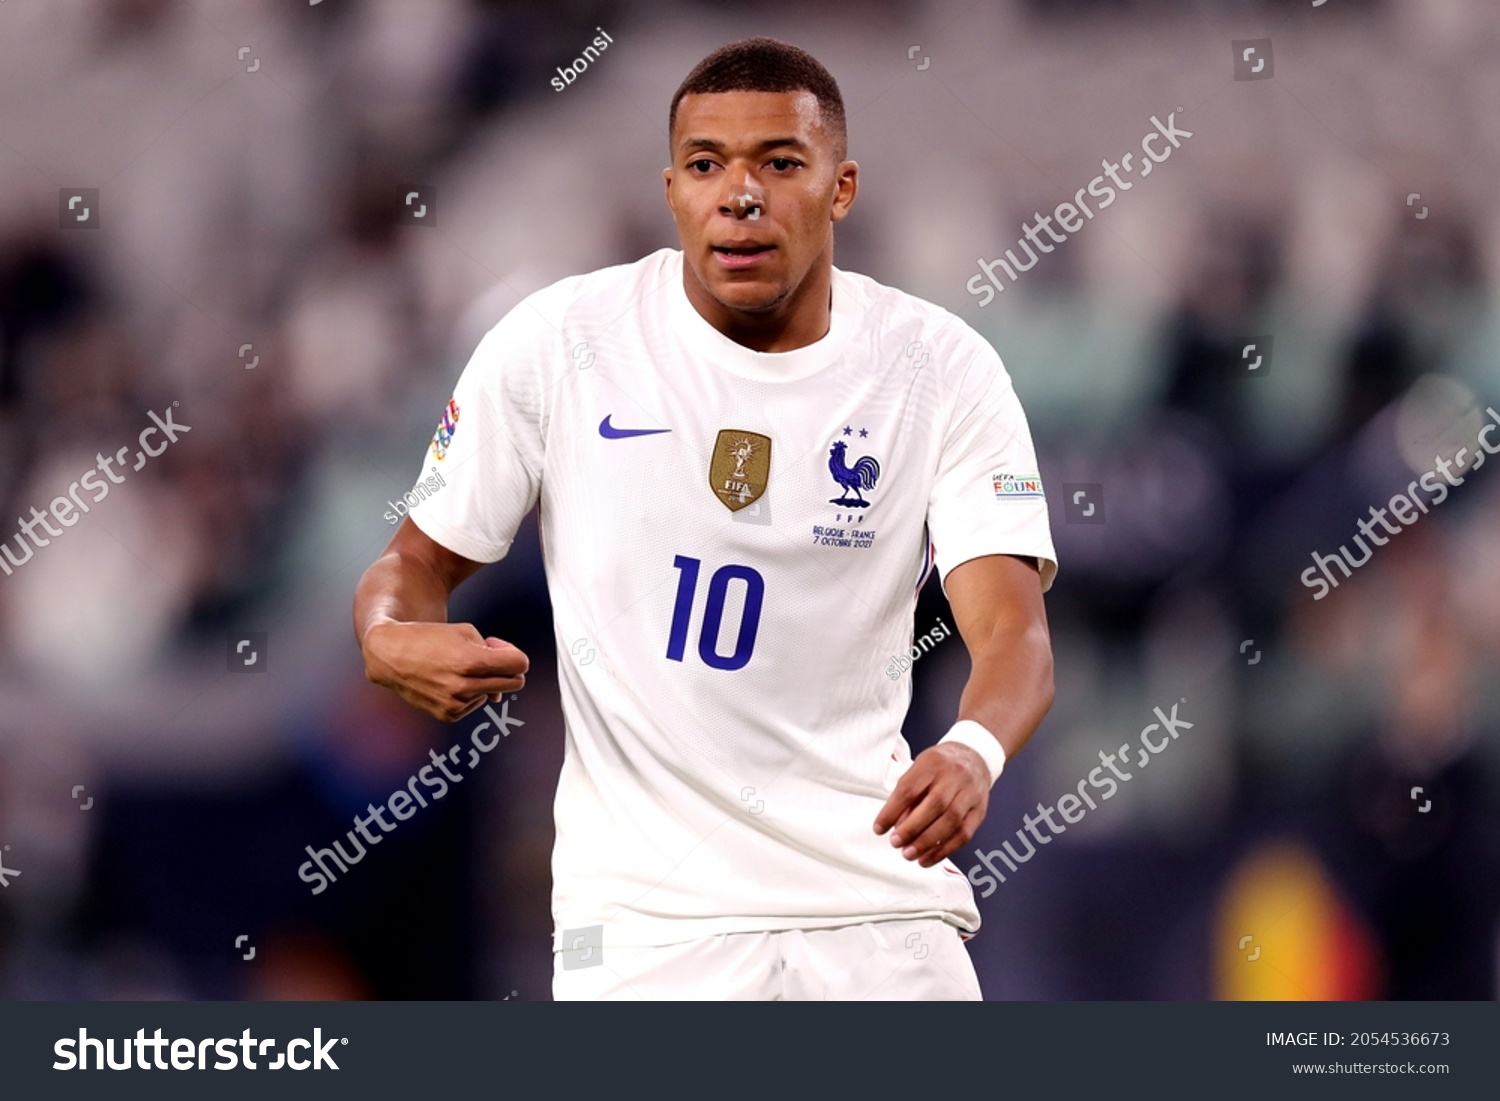 mbappe stats by year